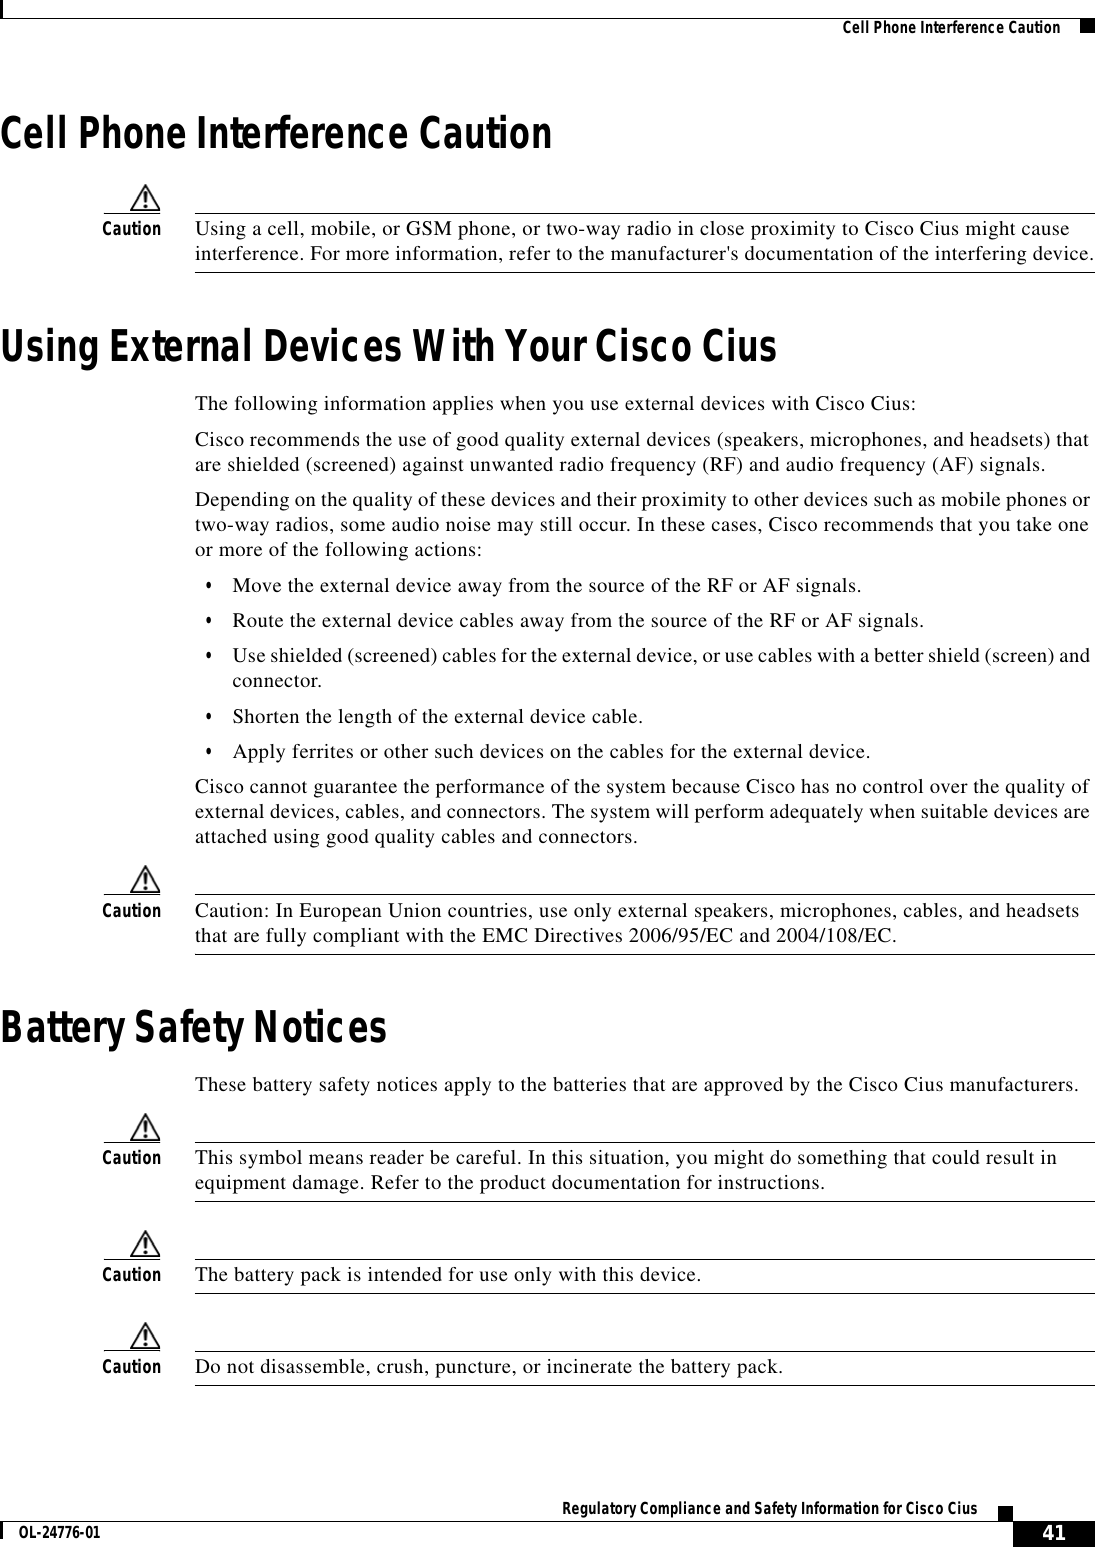  41Regulatory Compliance and Safety Information for Cisco CiusOL-24776-01  Cell Phone Interference CautionCell Phone Interference CautionCaution Using a cell, mobile, or GSM phone, or two-way radio in close proximity to Cisco Cius might cause interference. For more information, refer to the manufacturer&apos;s documentation of the interfering device.Using External Devices With Your Cisco CiusThe following information applies when you use external devices with Cisco Cius:Cisco recommends the use of good quality external devices (speakers, microphones, and headsets) that are shielded (screened) against unwanted radio frequency (RF) and audio frequency (AF) signals. Depending on the quality of these devices and their proximity to other devices such as mobile phones or two-way radios, some audio noise may still occur. In these cases, Cisco recommends that you take one or more of the following actions:  • Move the external device away from the source of the RF or AF signals.  • Route the external device cables away from the source of the RF or AF signals.  • Use shielded (screened) cables for the external device, or use cables with a better shield (screen) and connector. • Shorten the length of the external device cable. • Apply ferrites or other such devices on the cables for the external device. Cisco cannot guarantee the performance of the system because Cisco has no control over the quality of external devices, cables, and connectors. The system will perform adequately when suitable devices are attached using good quality cables and connectors. Caution Caution: In European Union countries, use only external speakers, microphones, cables, and headsets that are fully compliant with the EMC Directives 2006/95/EC and 2004/108/EC.Battery Safety NoticesThese battery safety notices apply to the batteries that are approved by the Cisco Cius manufacturers.Caution This symbol means reader be careful. In this situation, you might do something that could result in equipment damage. Refer to the product documentation for instructions.Caution The battery pack is intended for use only with this device.Caution Do not disassemble, crush, puncture, or incinerate the battery pack.